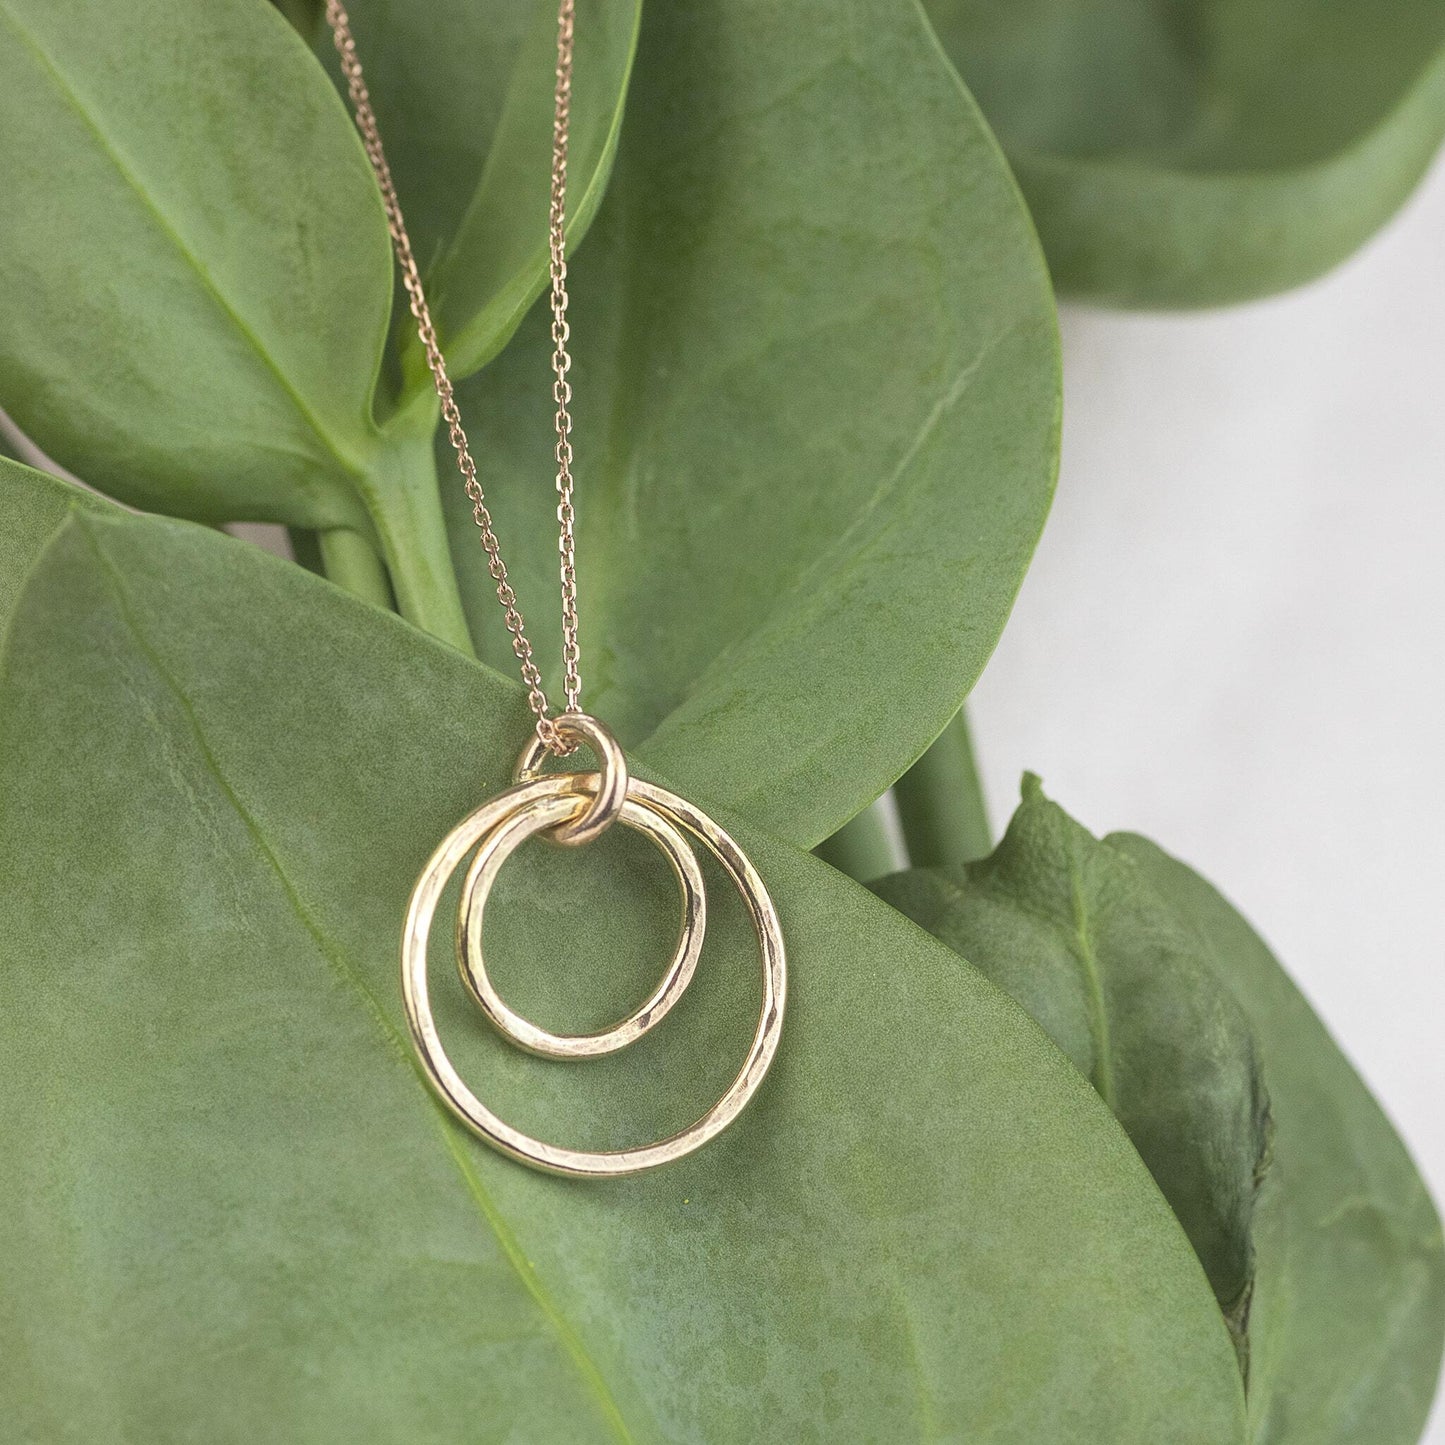 Double Circle Necklace for Loved One - 9kt Gold - Forever Encircled With Love